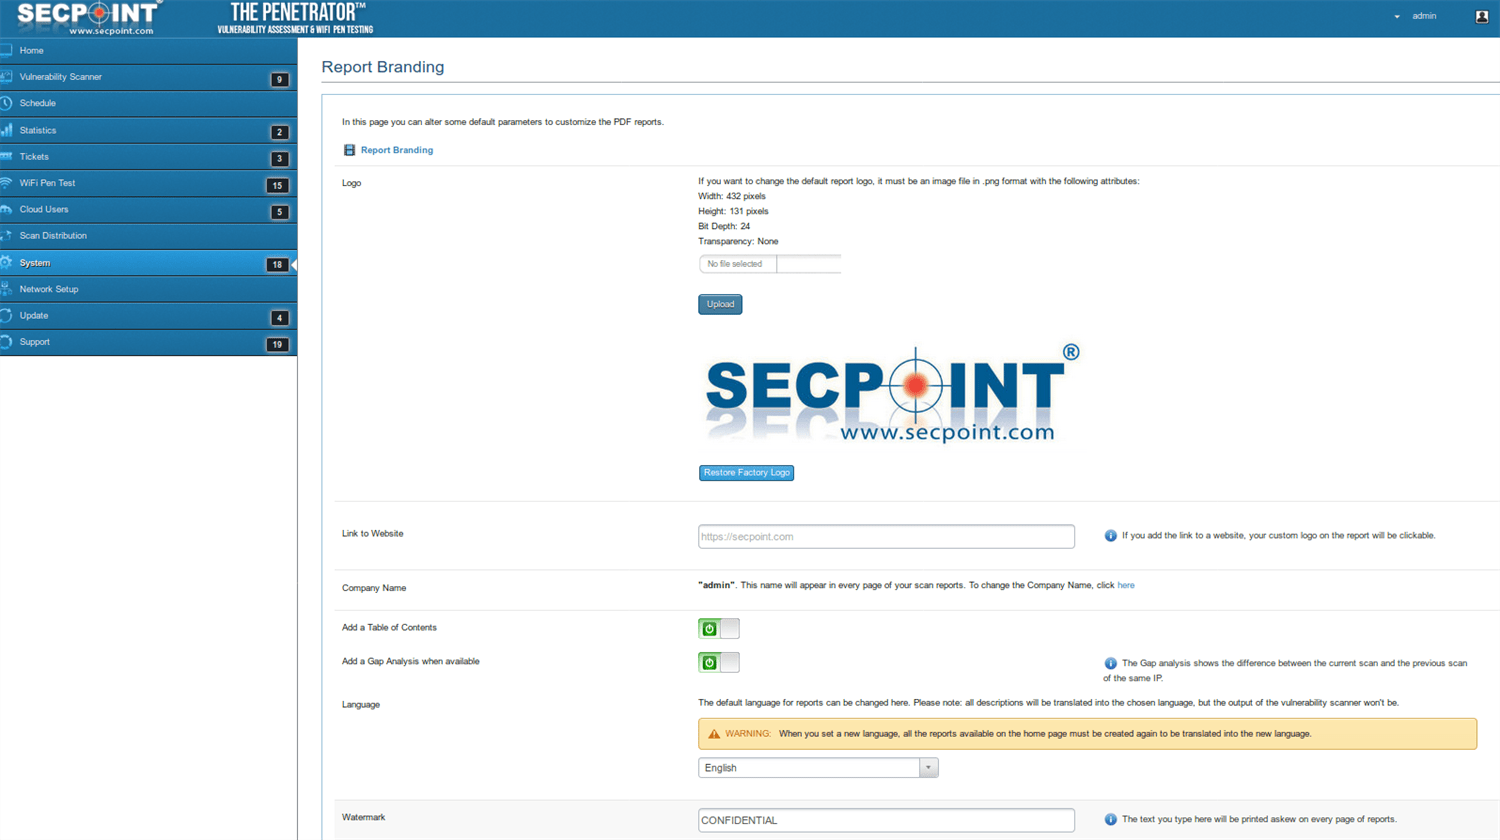 SecPoint Penetrator S9 - 128 IP Concurrent Scan License Vuln Scanner (3 Years License) - SecPoint